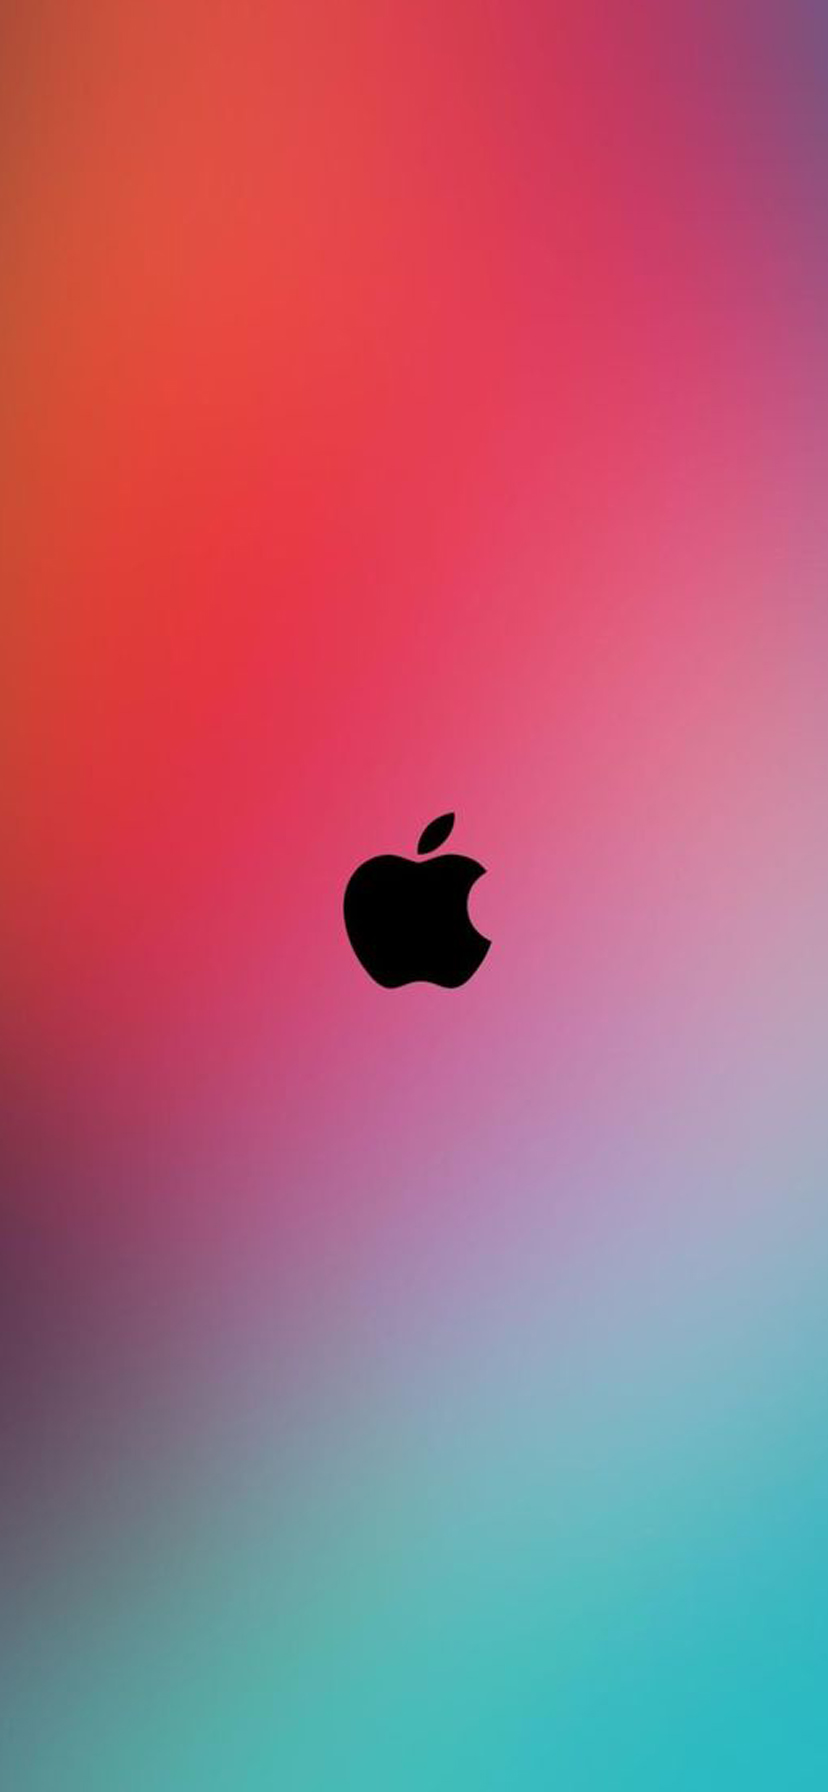 10 Alternative Wallpapers for Apple iPhone 11 - 03 - Simple Colorful ...